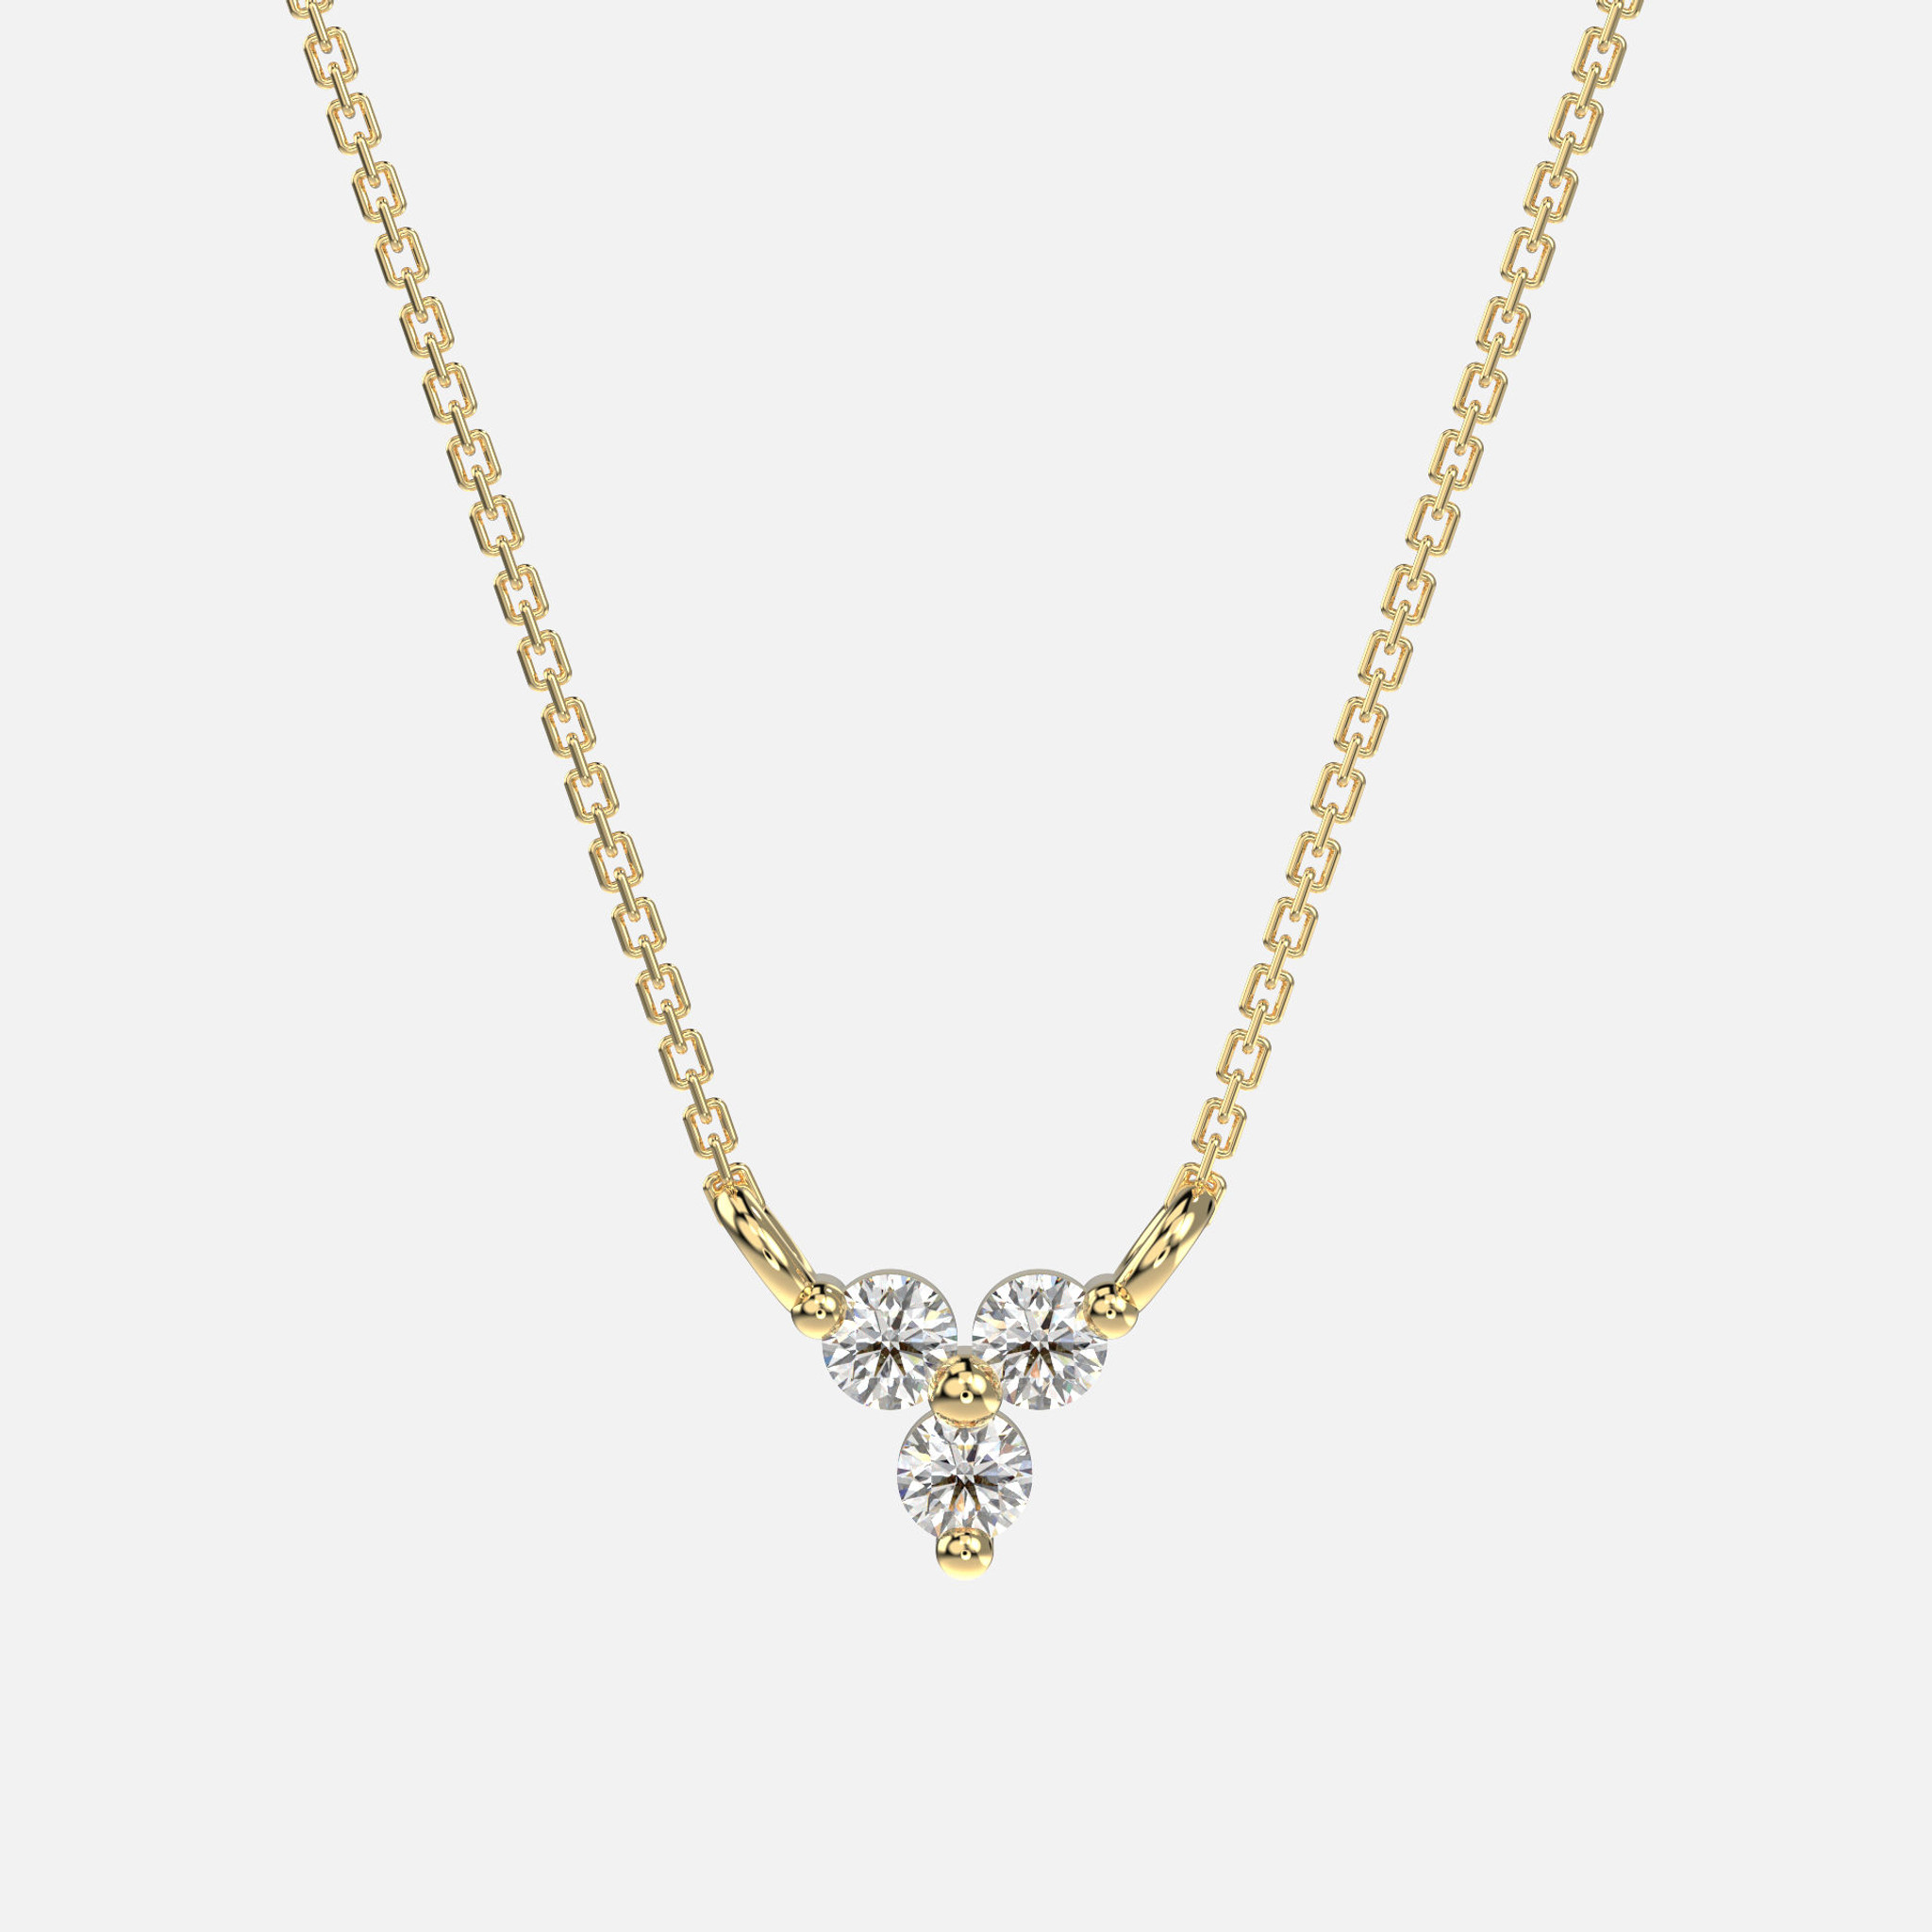 14k yellow gold diamond trio necklace. Anchored by .13 CTW round-prong diamond triad on fine cable chain.